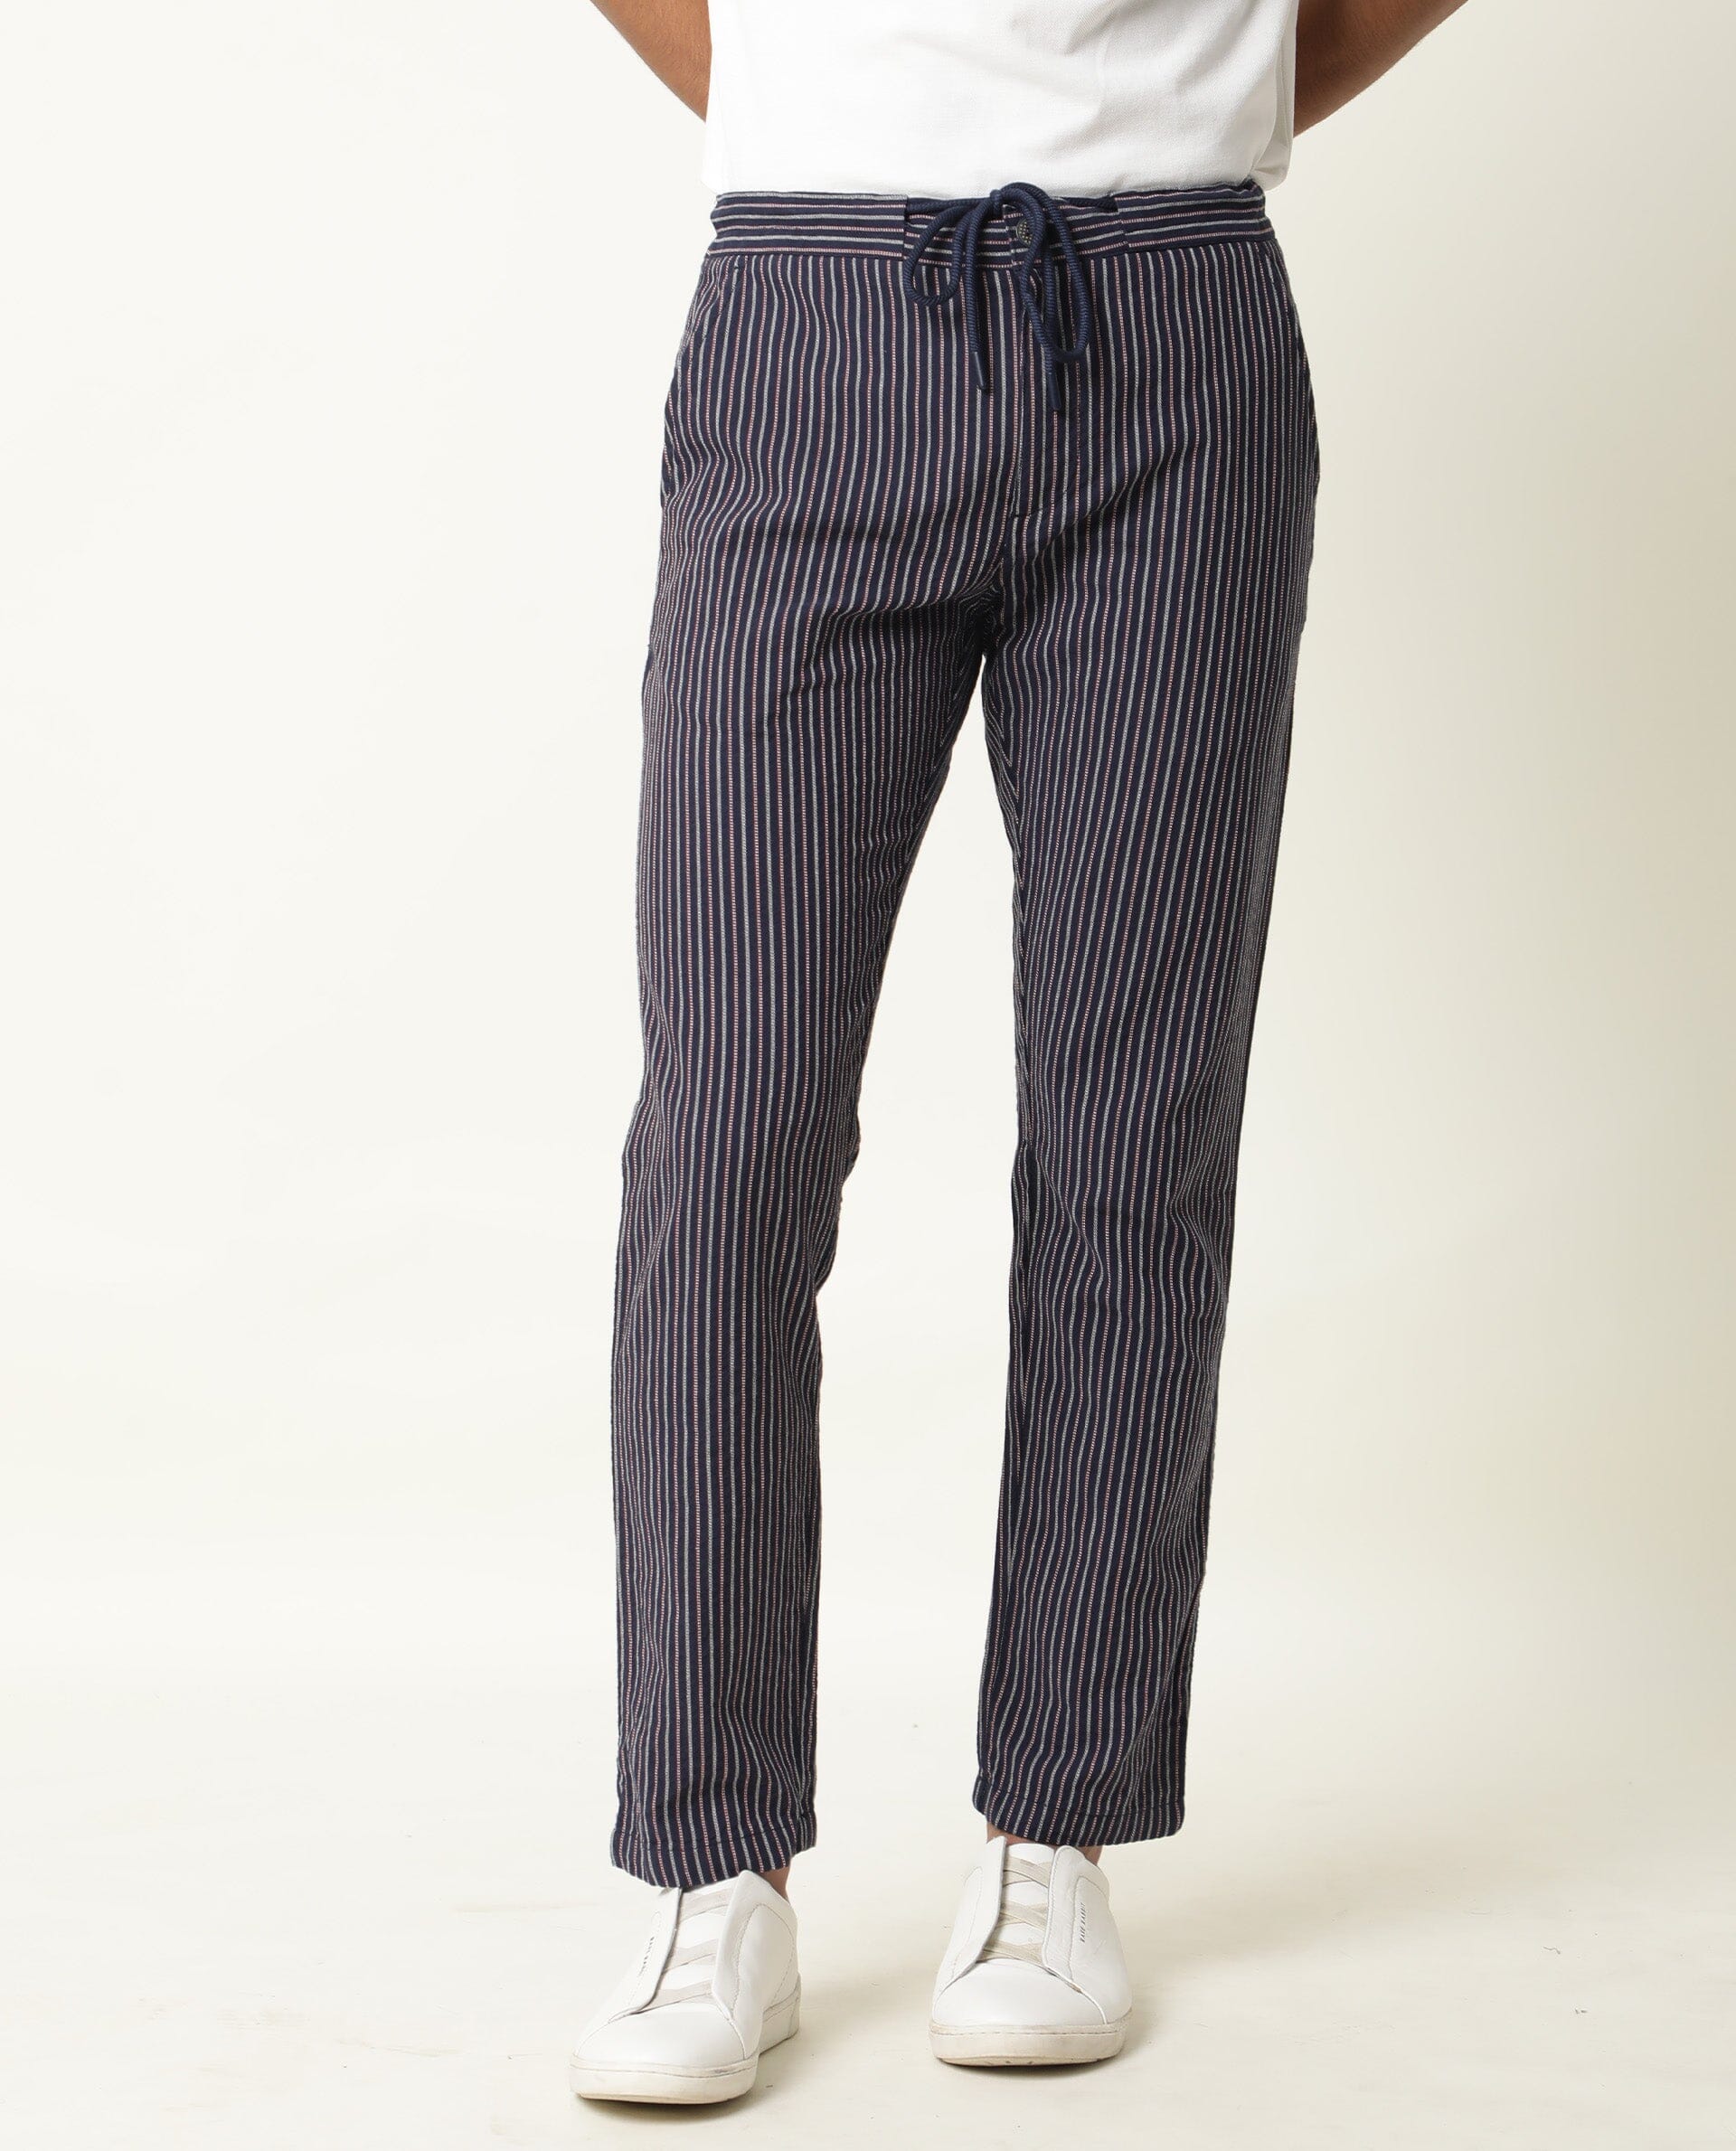 Buy ALL Plus Size Women Navy Blue White Regular Fit Striped Trousers   Trousers for Women 9315763  Myntra